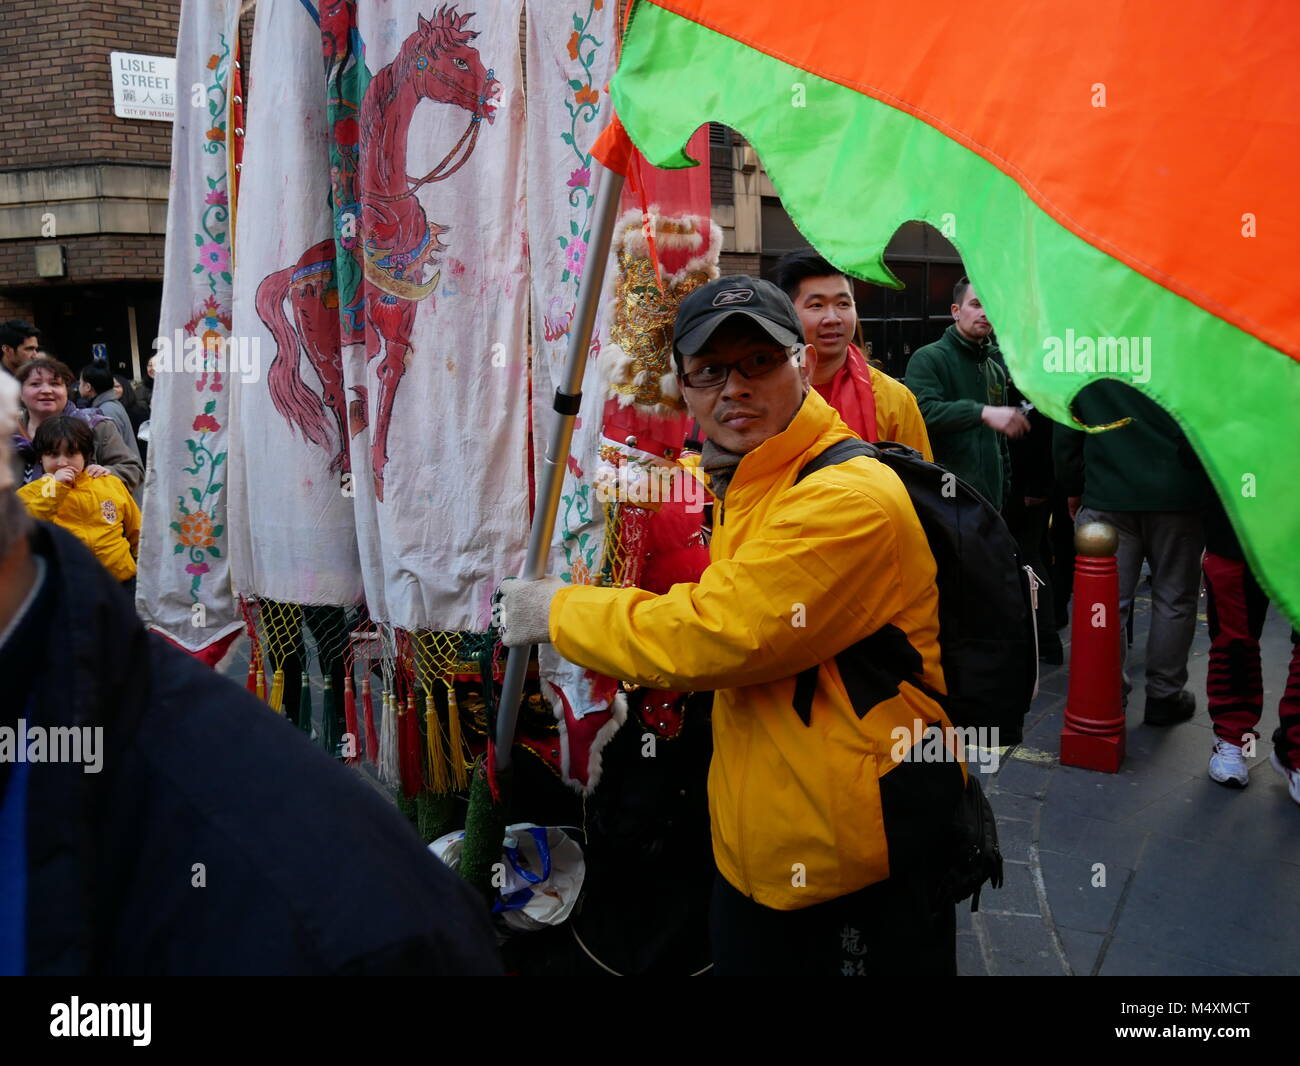 Man carrying flags during Chinese New Year in London's China town 2018. Stock Photo